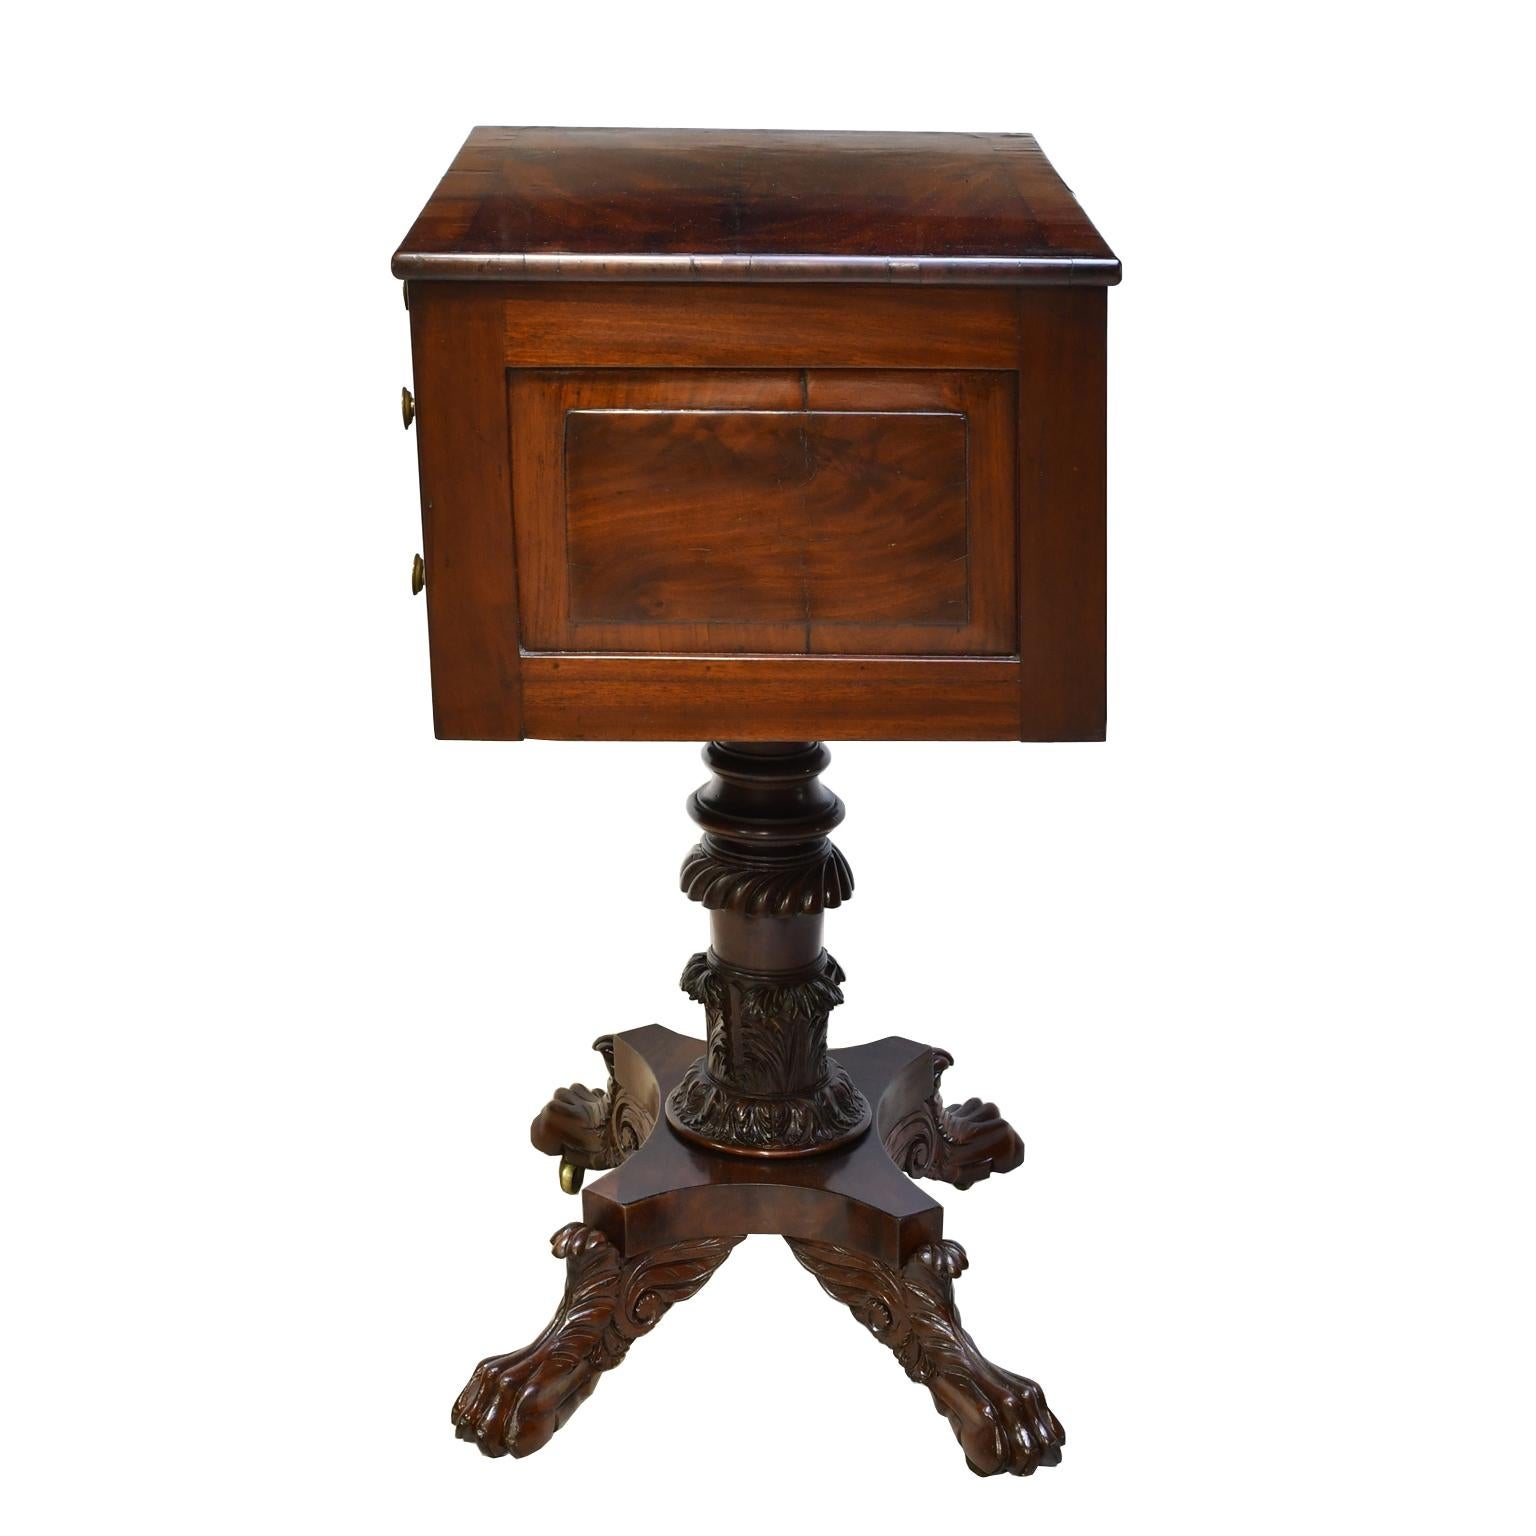 A stunning American Federal table in mahogany with neoclassical form in the manner of renown Philadelphia cabinetmaker Anthony Quervelle. Top offers three convex drawers and rests on turned and intricately-carved column over a quatre-form base that